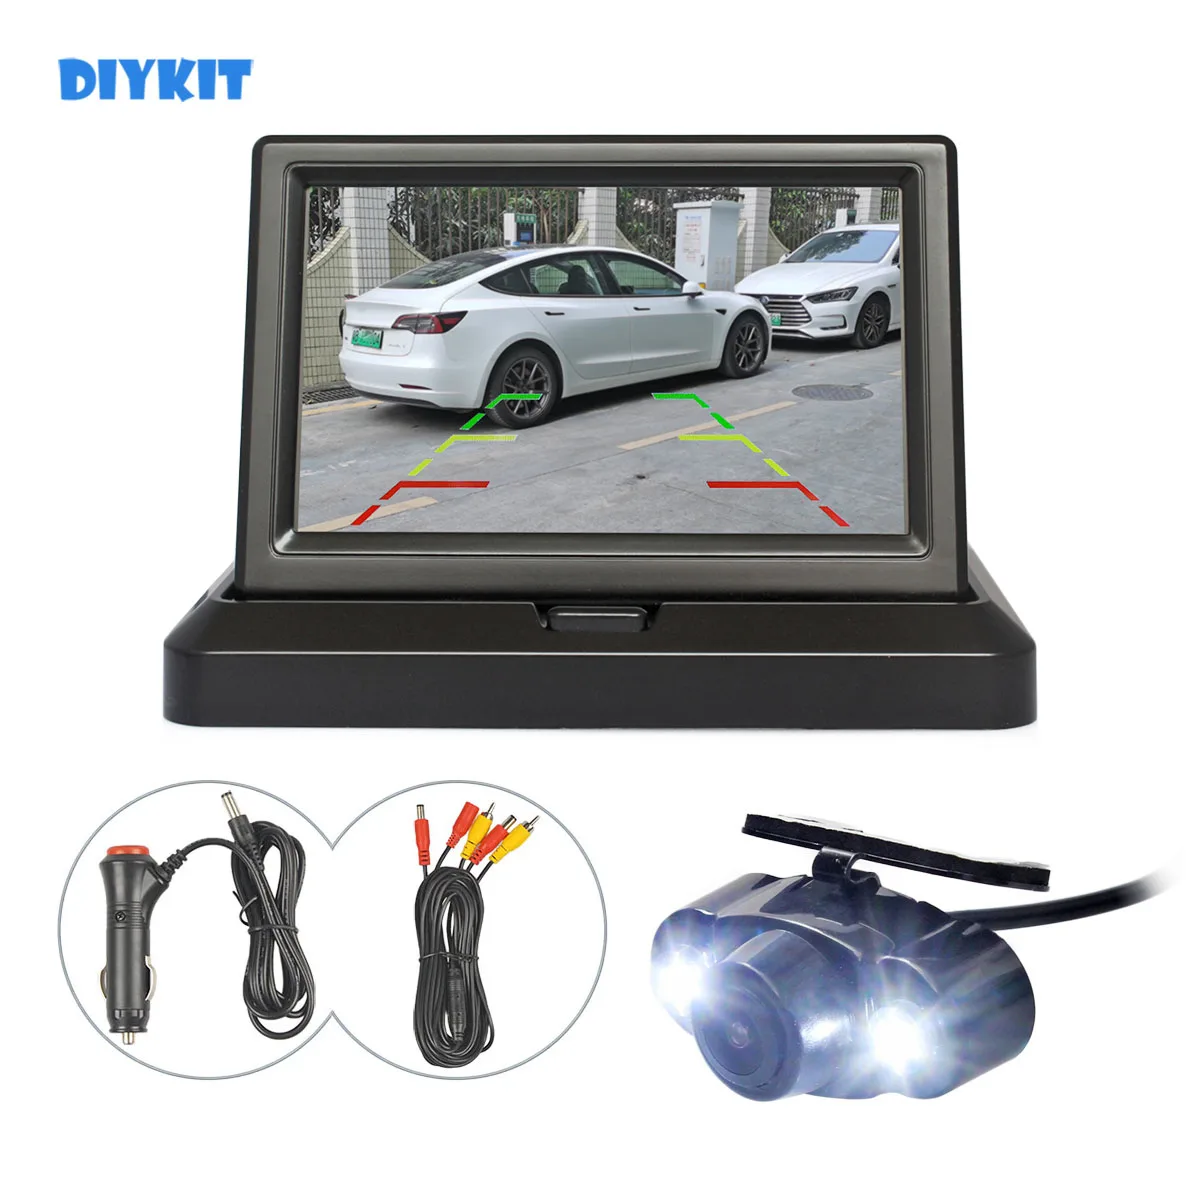 DIYKIT Wired 5" Foldable Rear View Monitor Car Monitor Waterproof LED Color Night Vision Rear View Car Camera Parking System